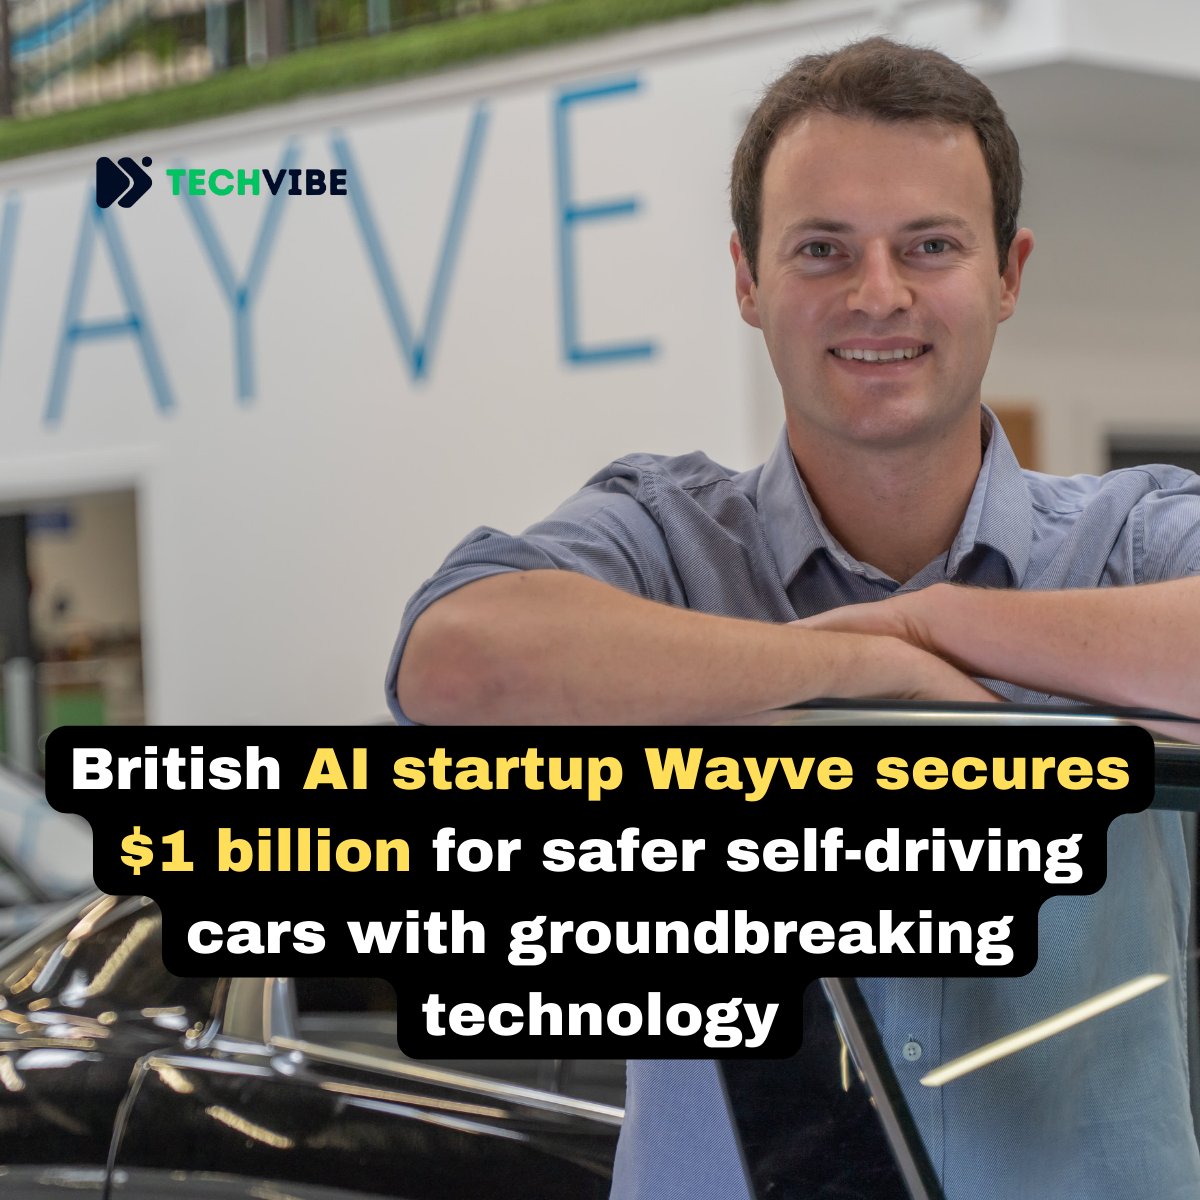 British AI startup Wayve secures over $1 billion in funding to enhance its pioneering embodied AI technology, promising safer self-driving cars by enabling vehicles to learn from human behavior in real-world settings. more: t.ly/U-uDZ #AI #AIStartup #Wayve